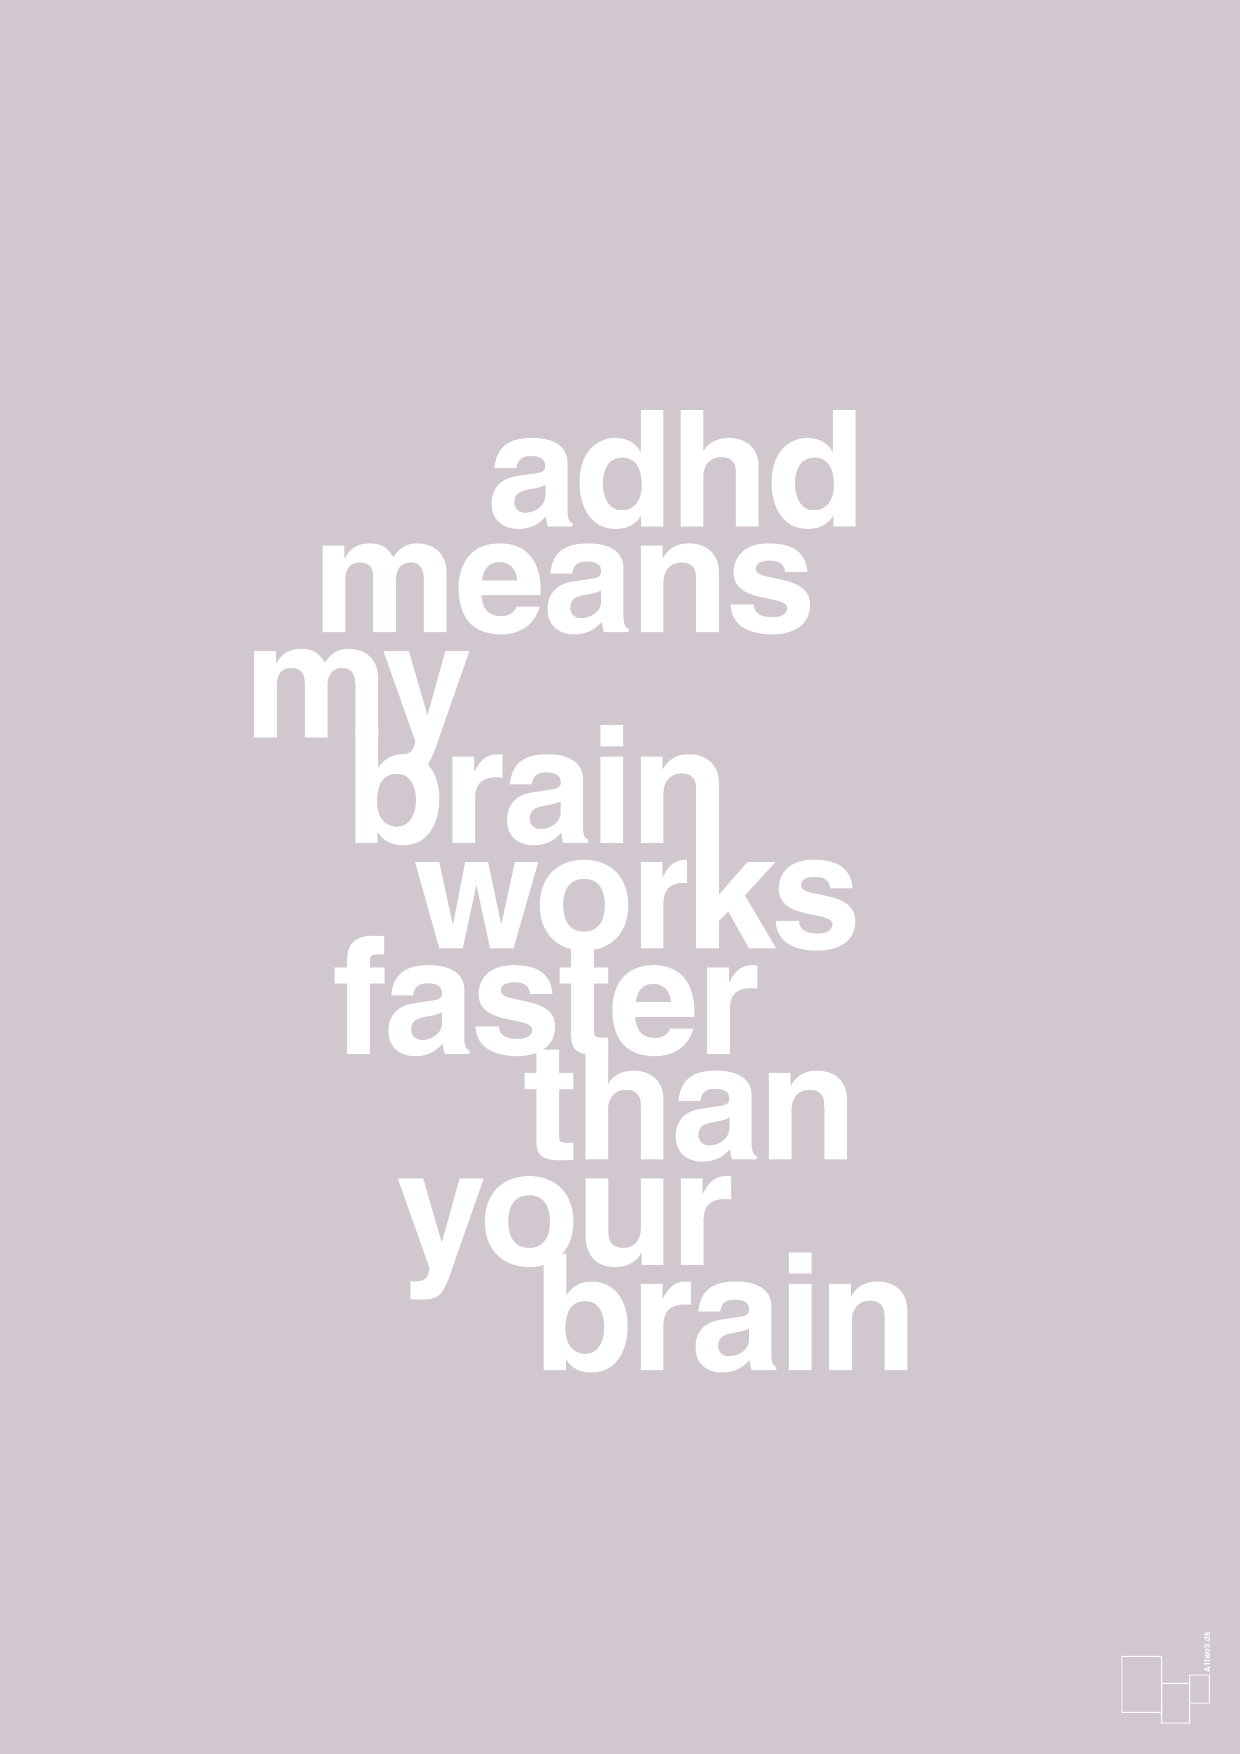 adhd means my brain works faster than your brain - Plakat med Samfund i Dusty Lilac